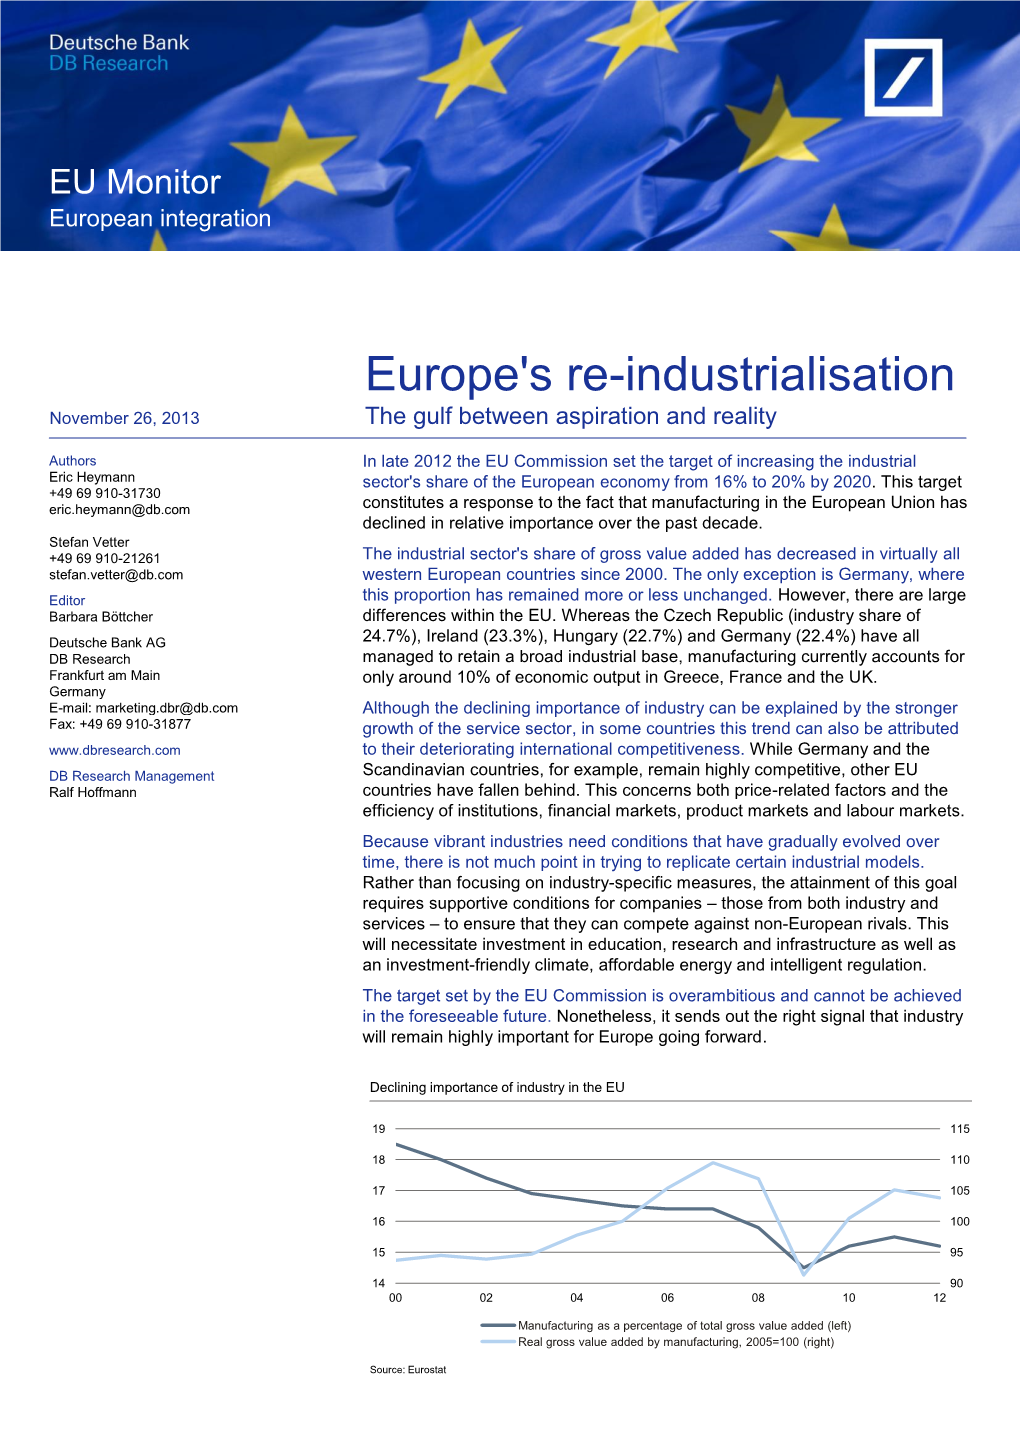 Europe's Re-Industrialisation November 26, 2013 the Gulf Between Aspiration and Reality